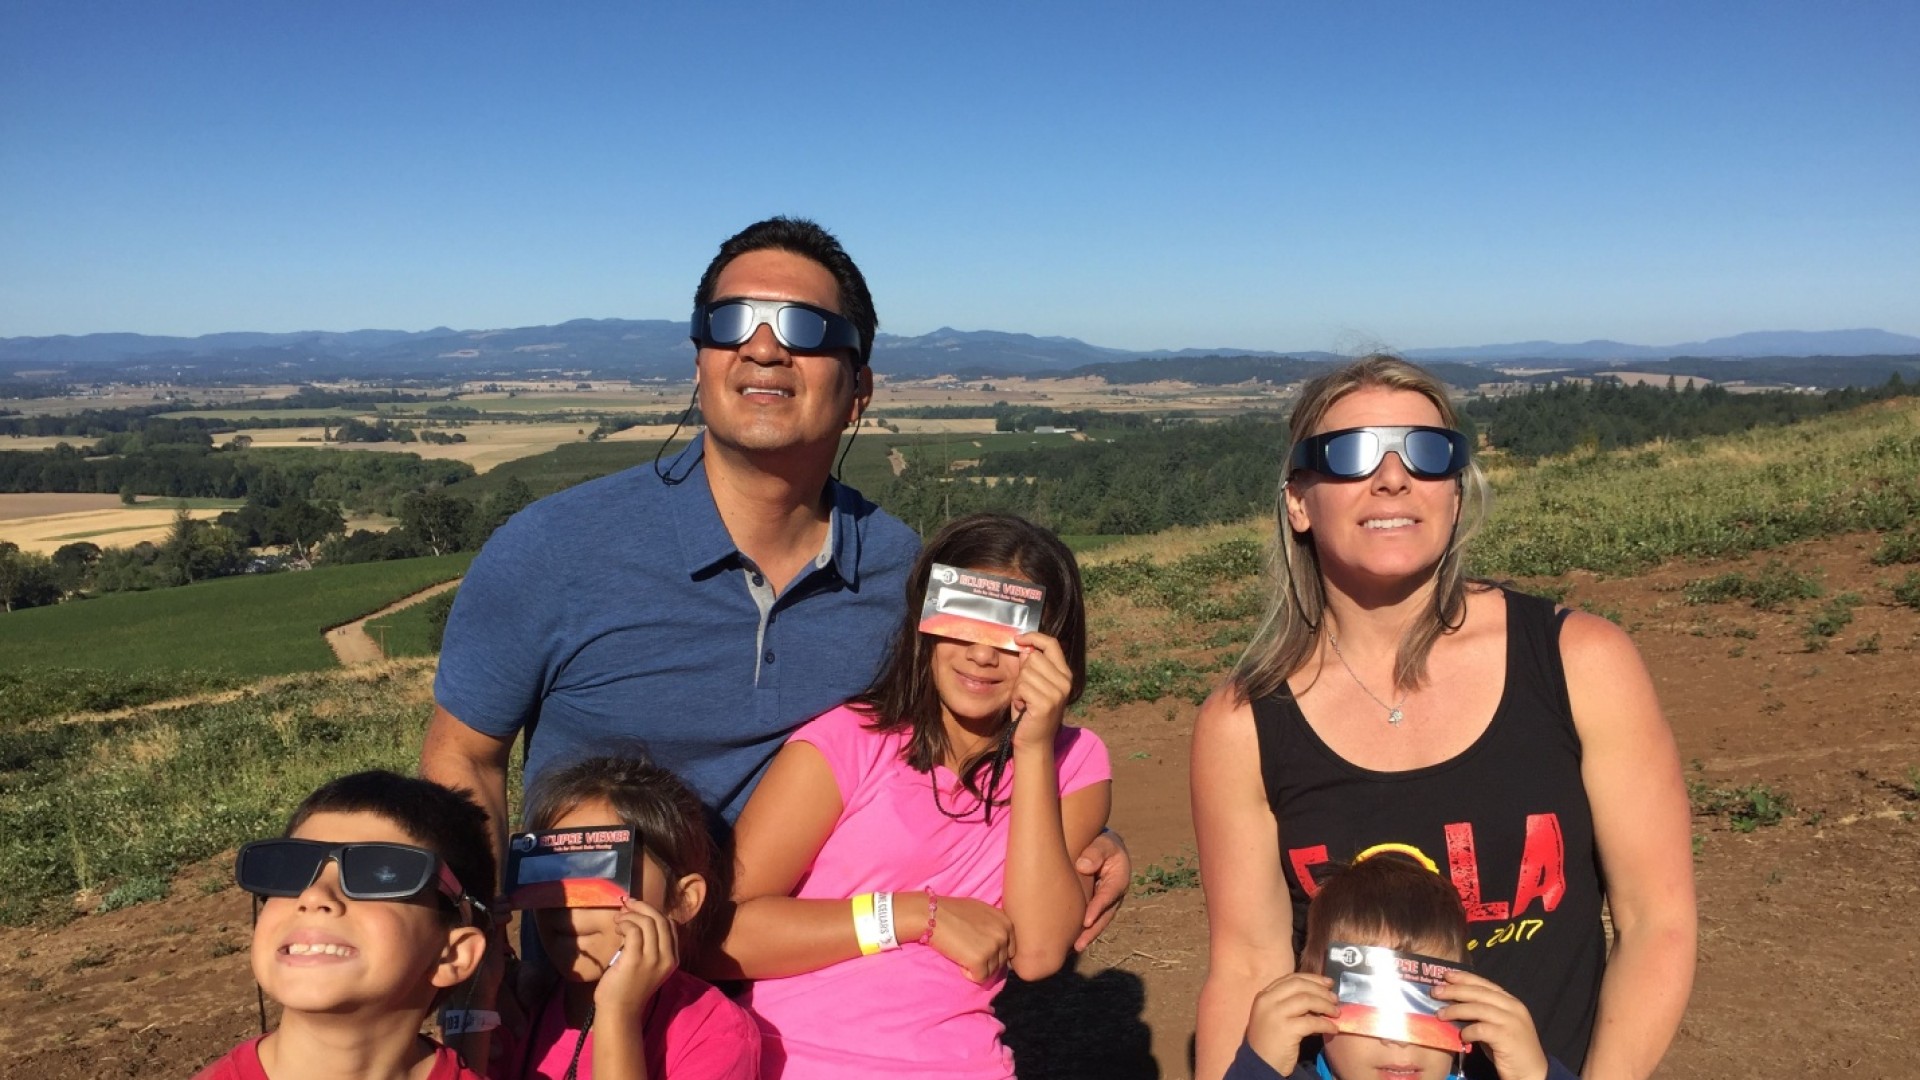 Need eclipse glasses? Some 7-Eleven stores have them – but hurry